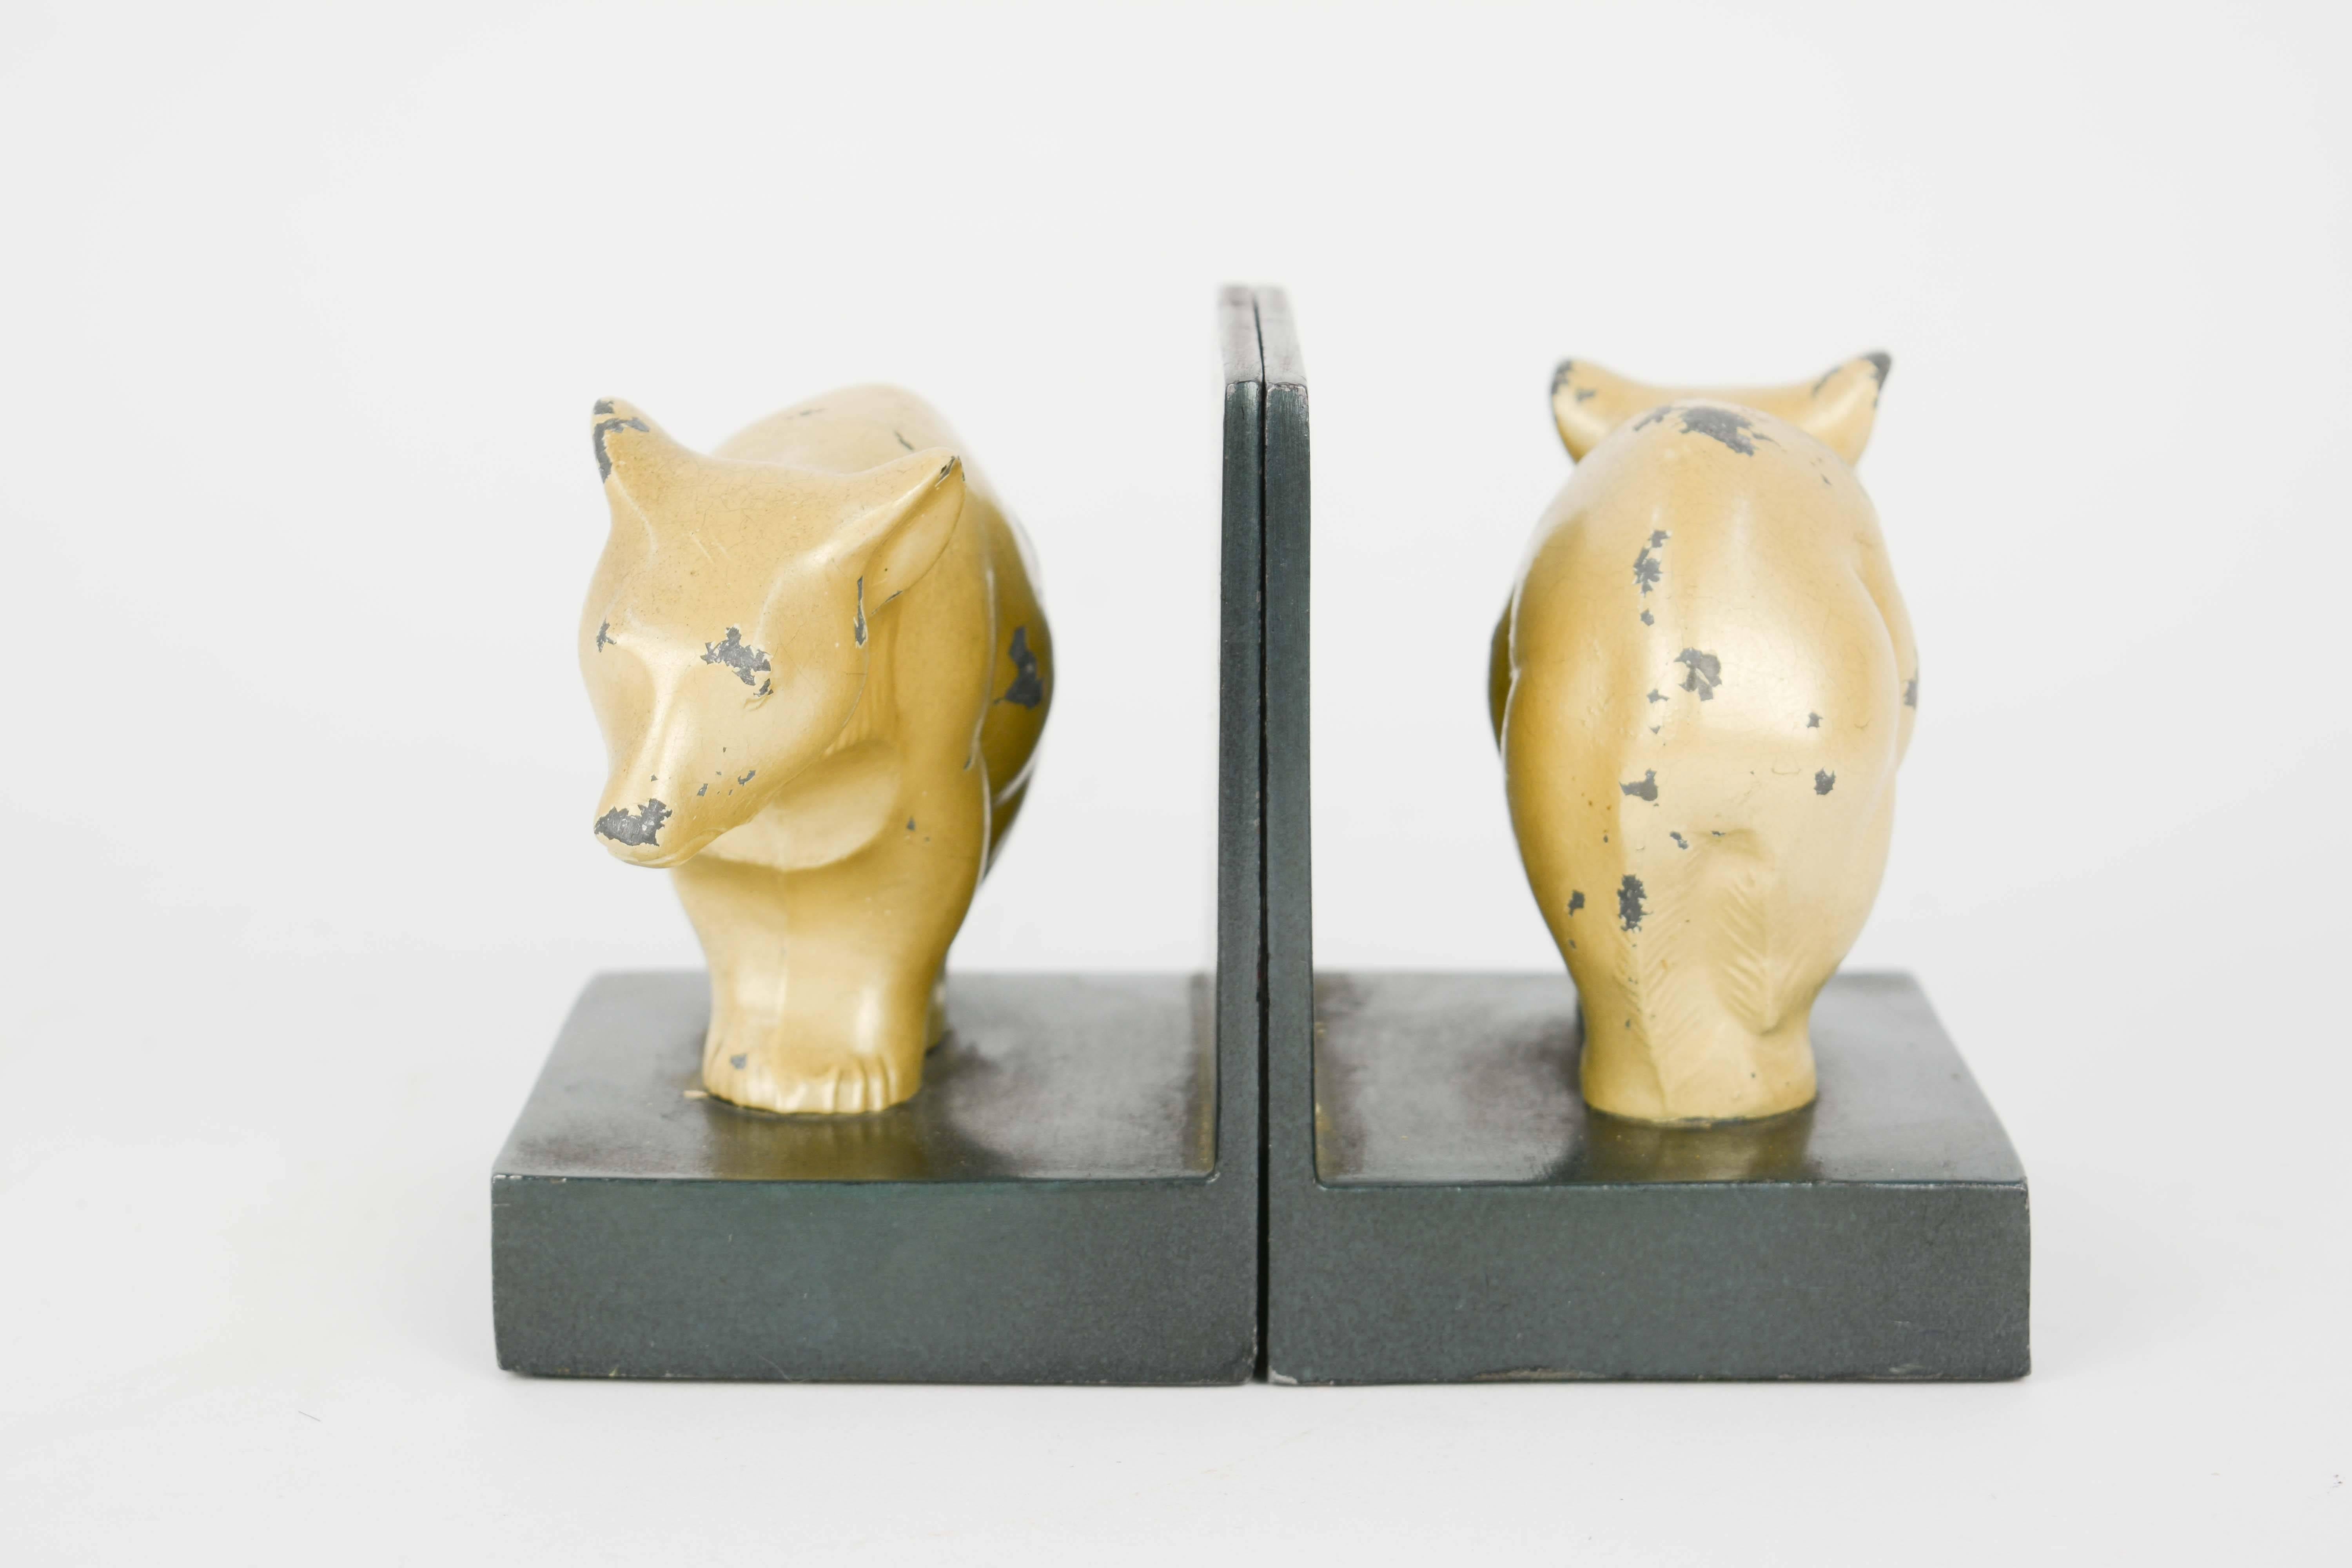 Art Deco Bauhaus and Early Modernist Abstract Bear Bookends